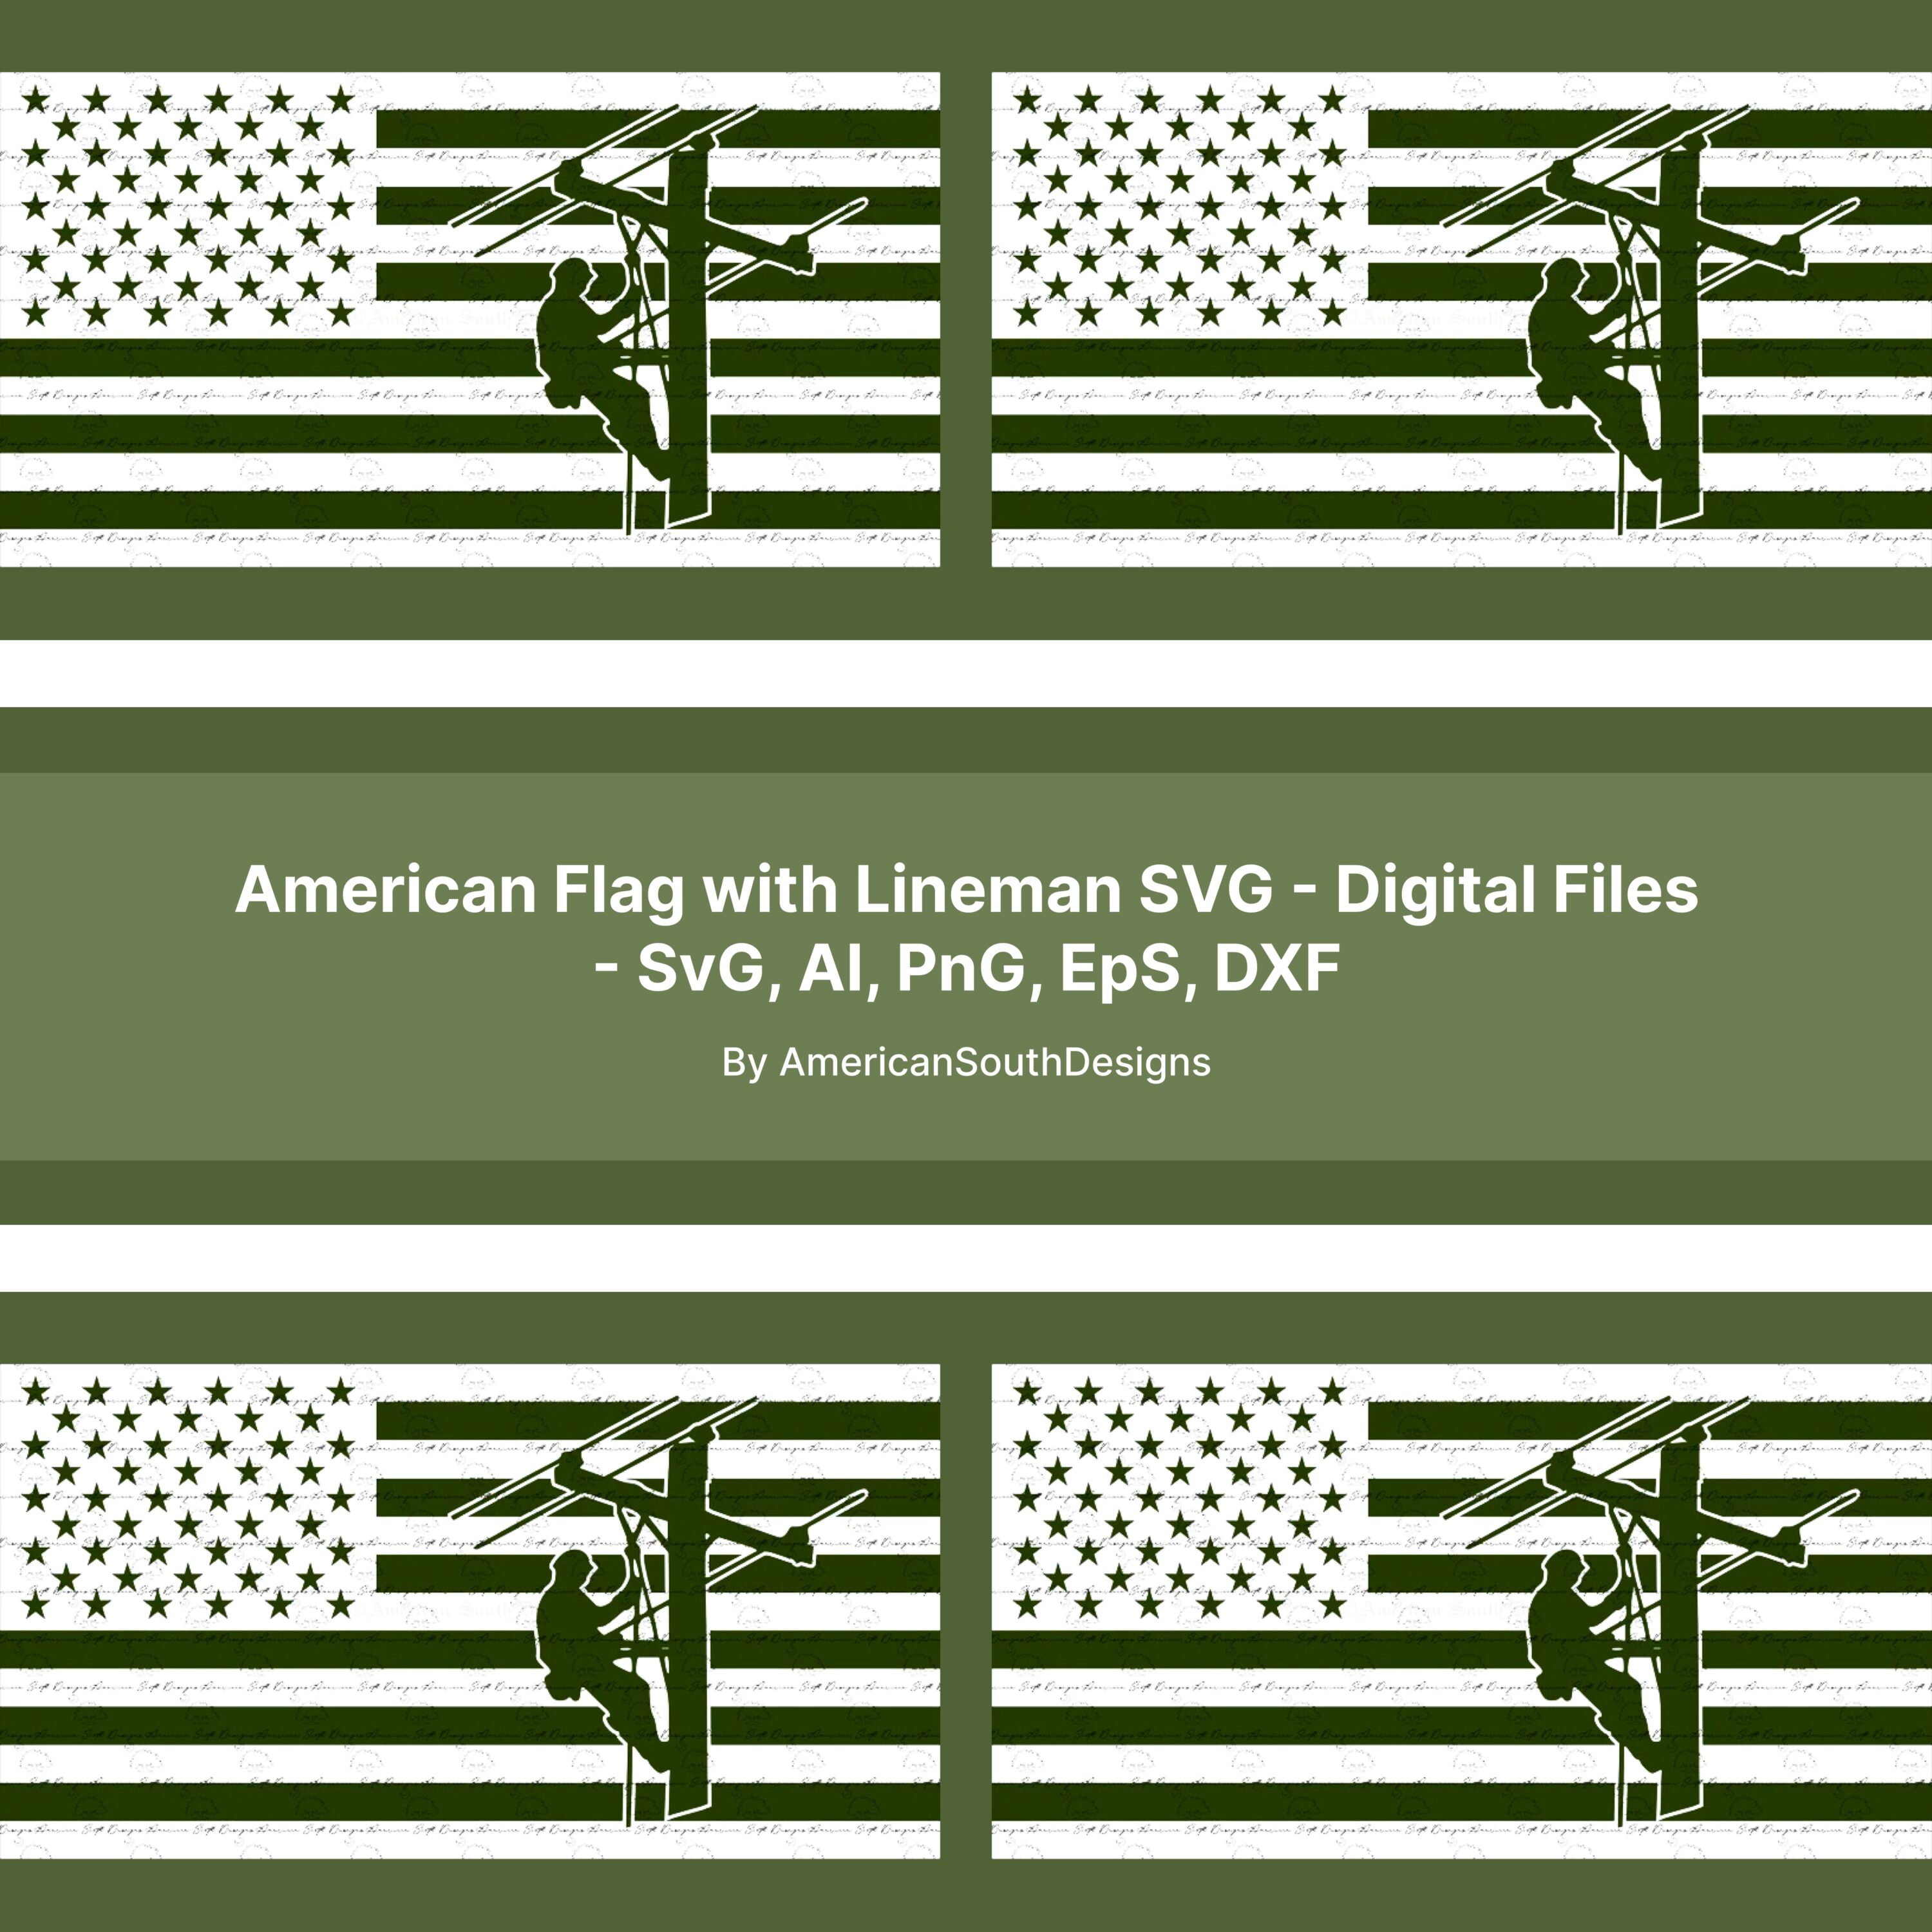 American Flag with Lineman SVG.